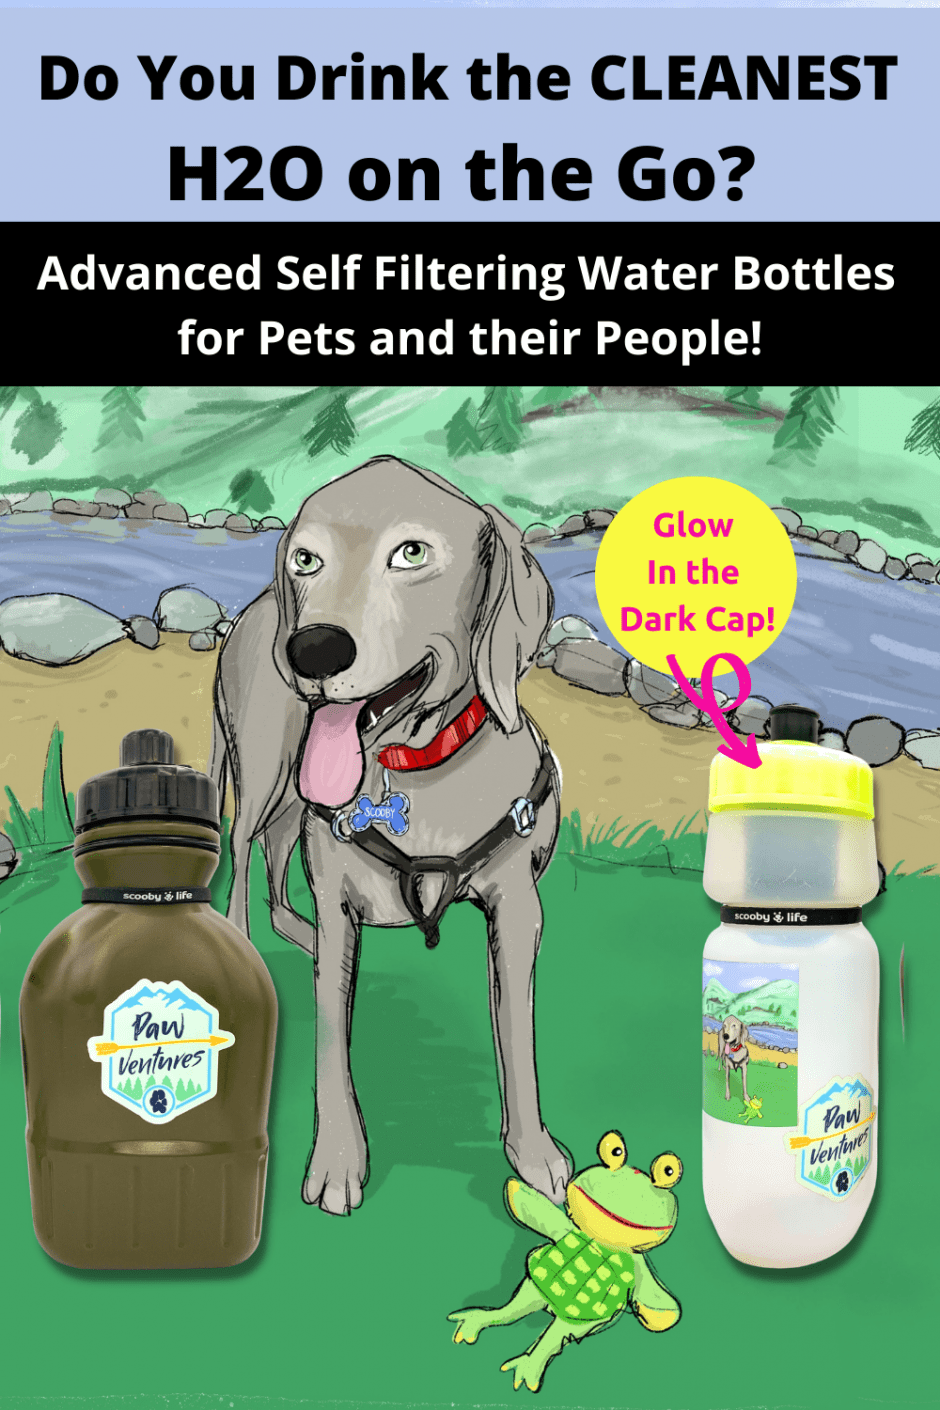 Smart Water Bottles with Advanced Filter from Scoobylife by PawVentures Pin